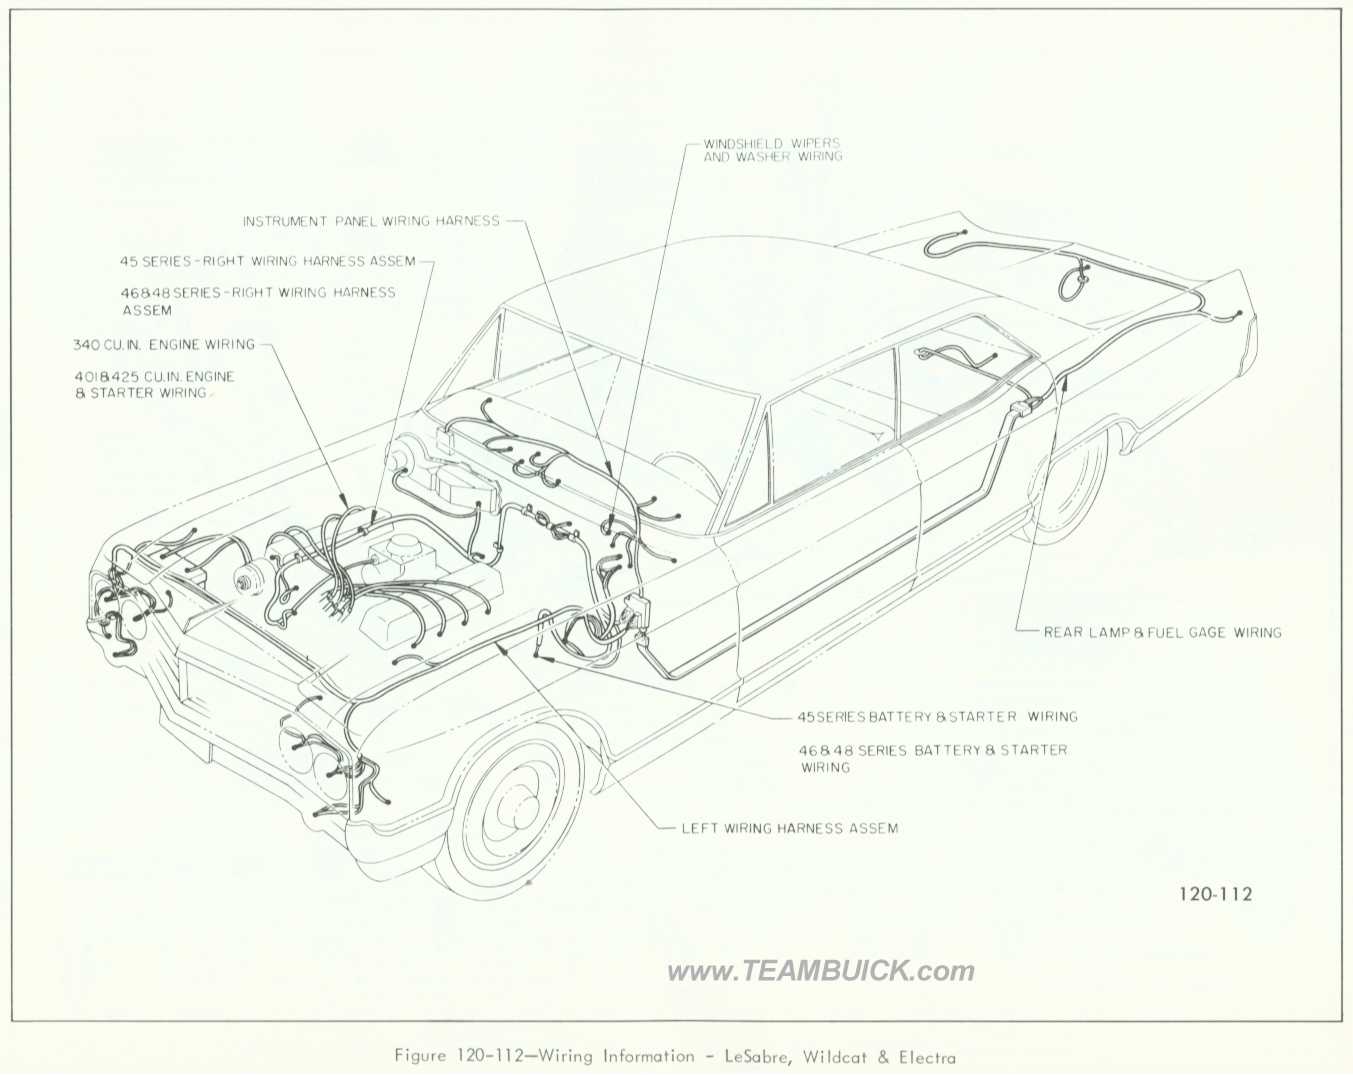 1966 Buick LeSabre, Wildcat and Electra, Wiring Information